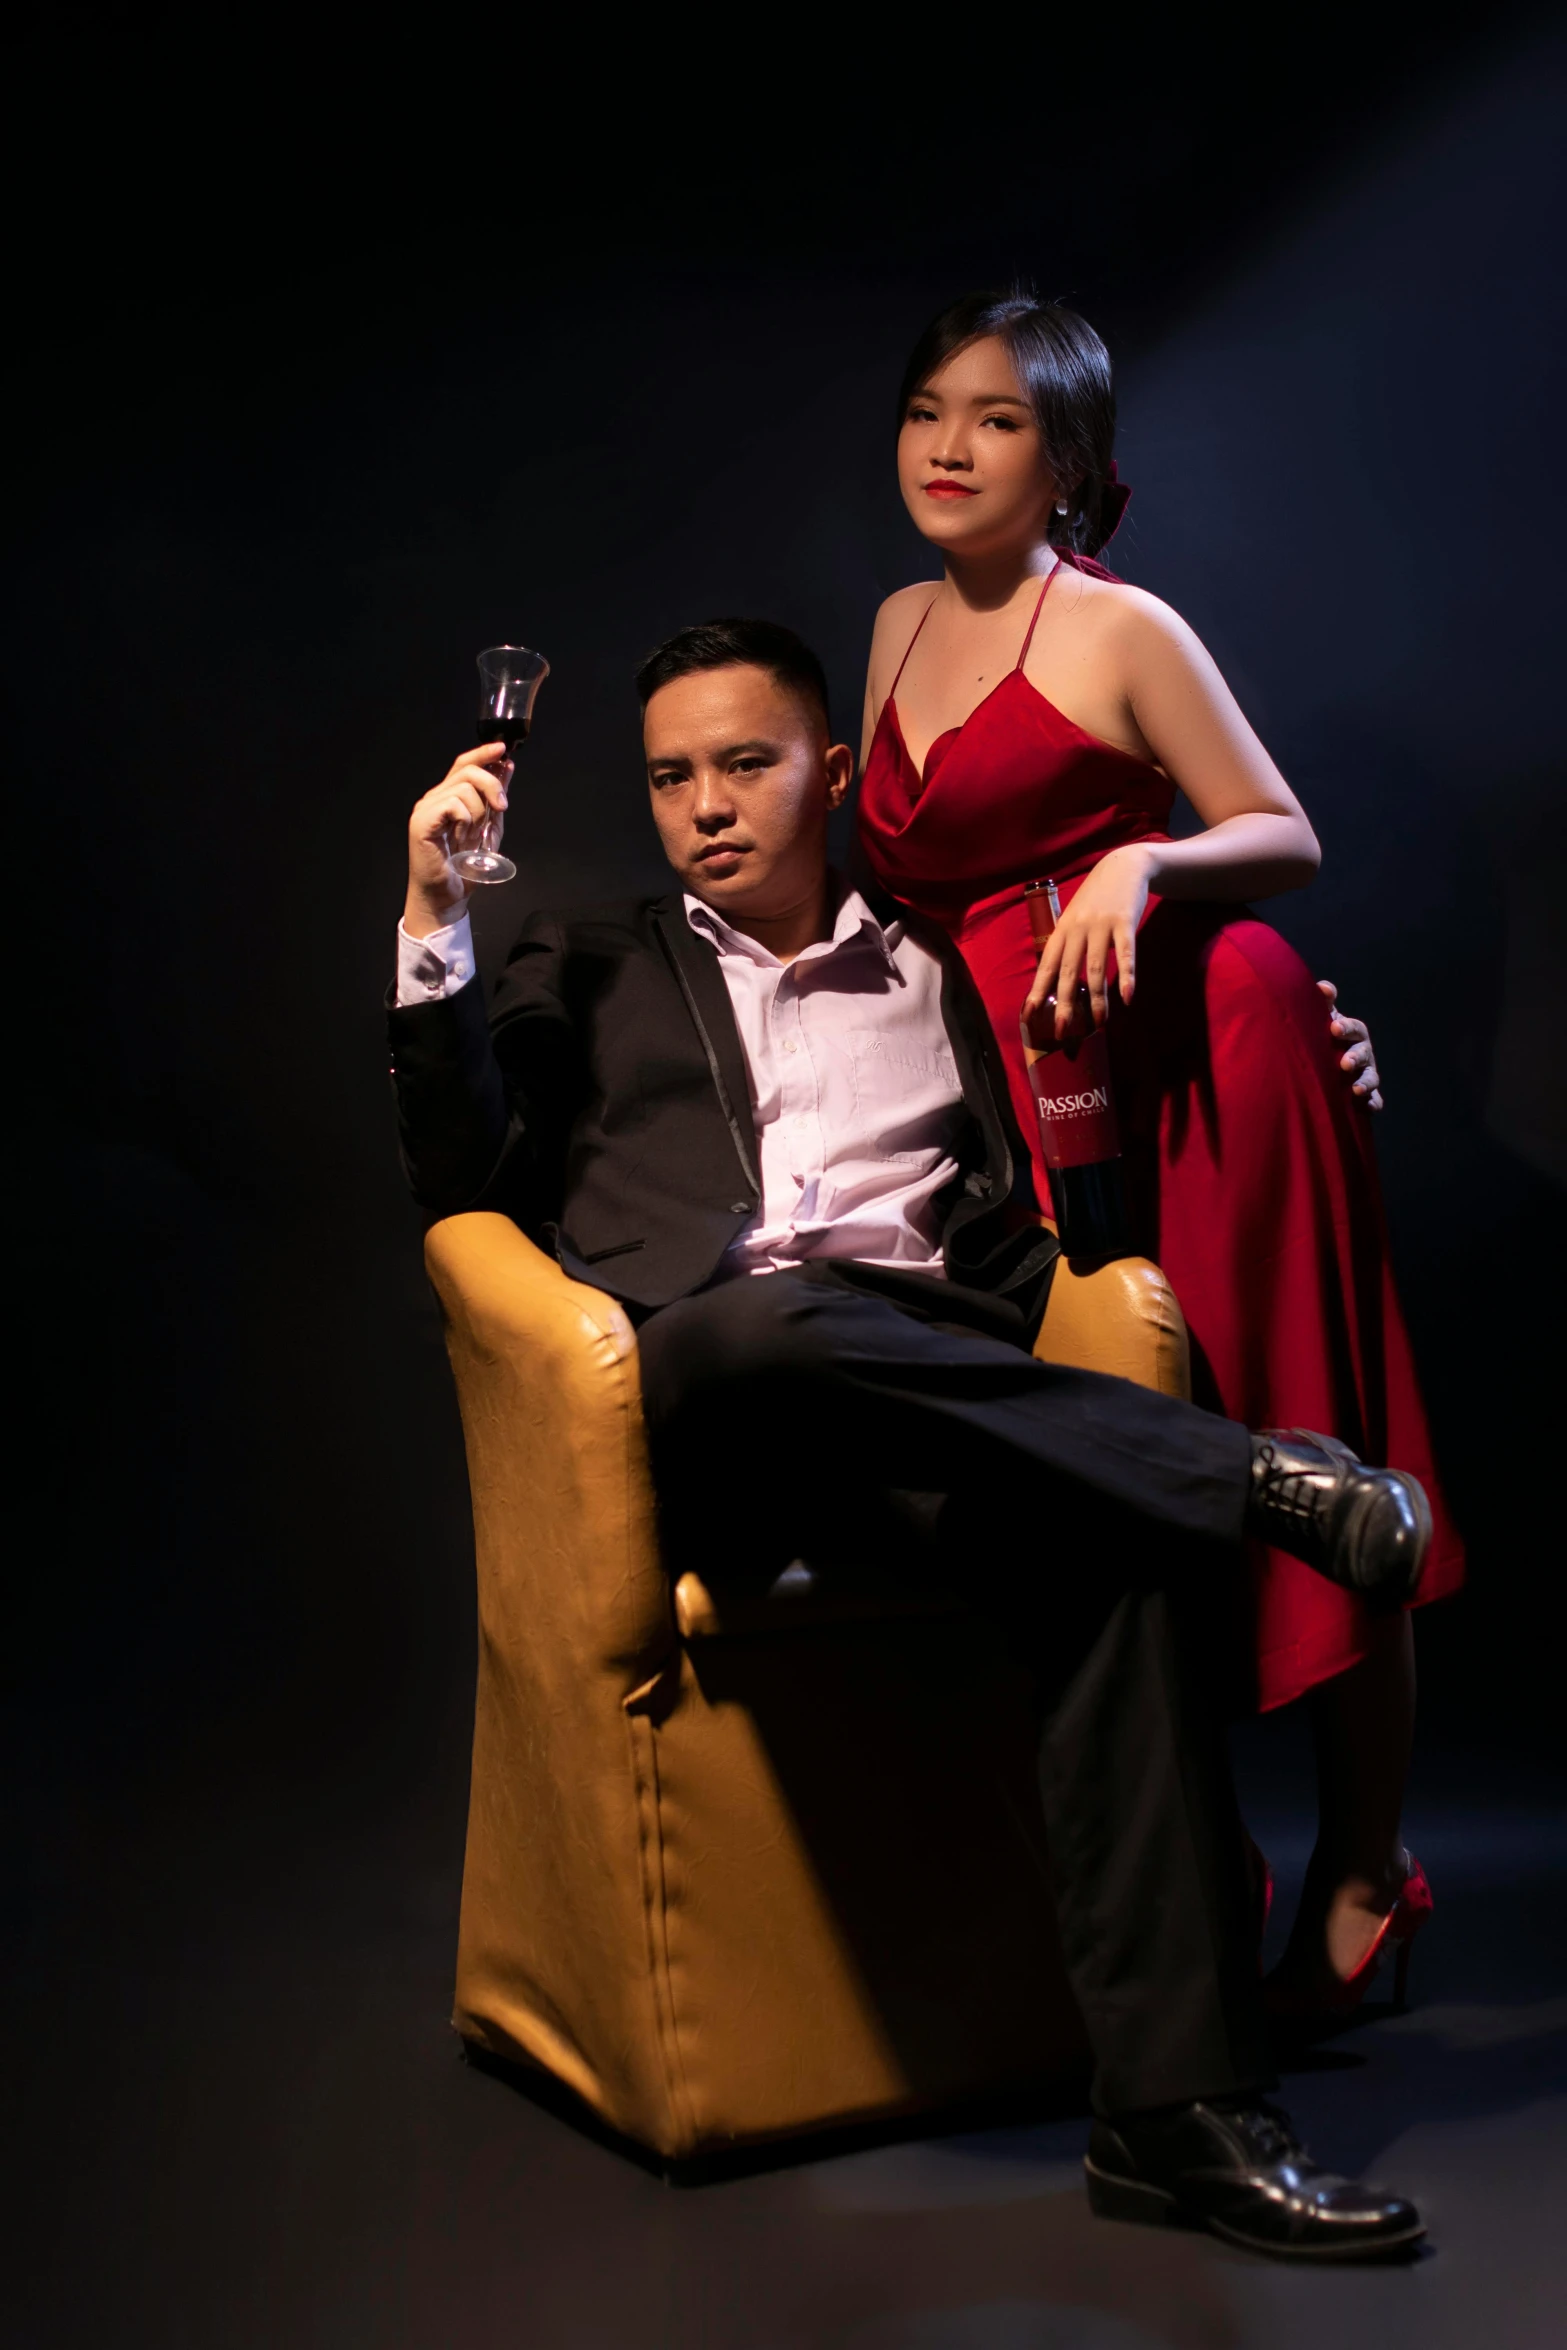 a man in a tuxedo sitting next to a woman in a red dress, inspired by Eddie Mendoza, david luong, ( ( theatrical ) ), studio photoshoot, sitting on an armchair